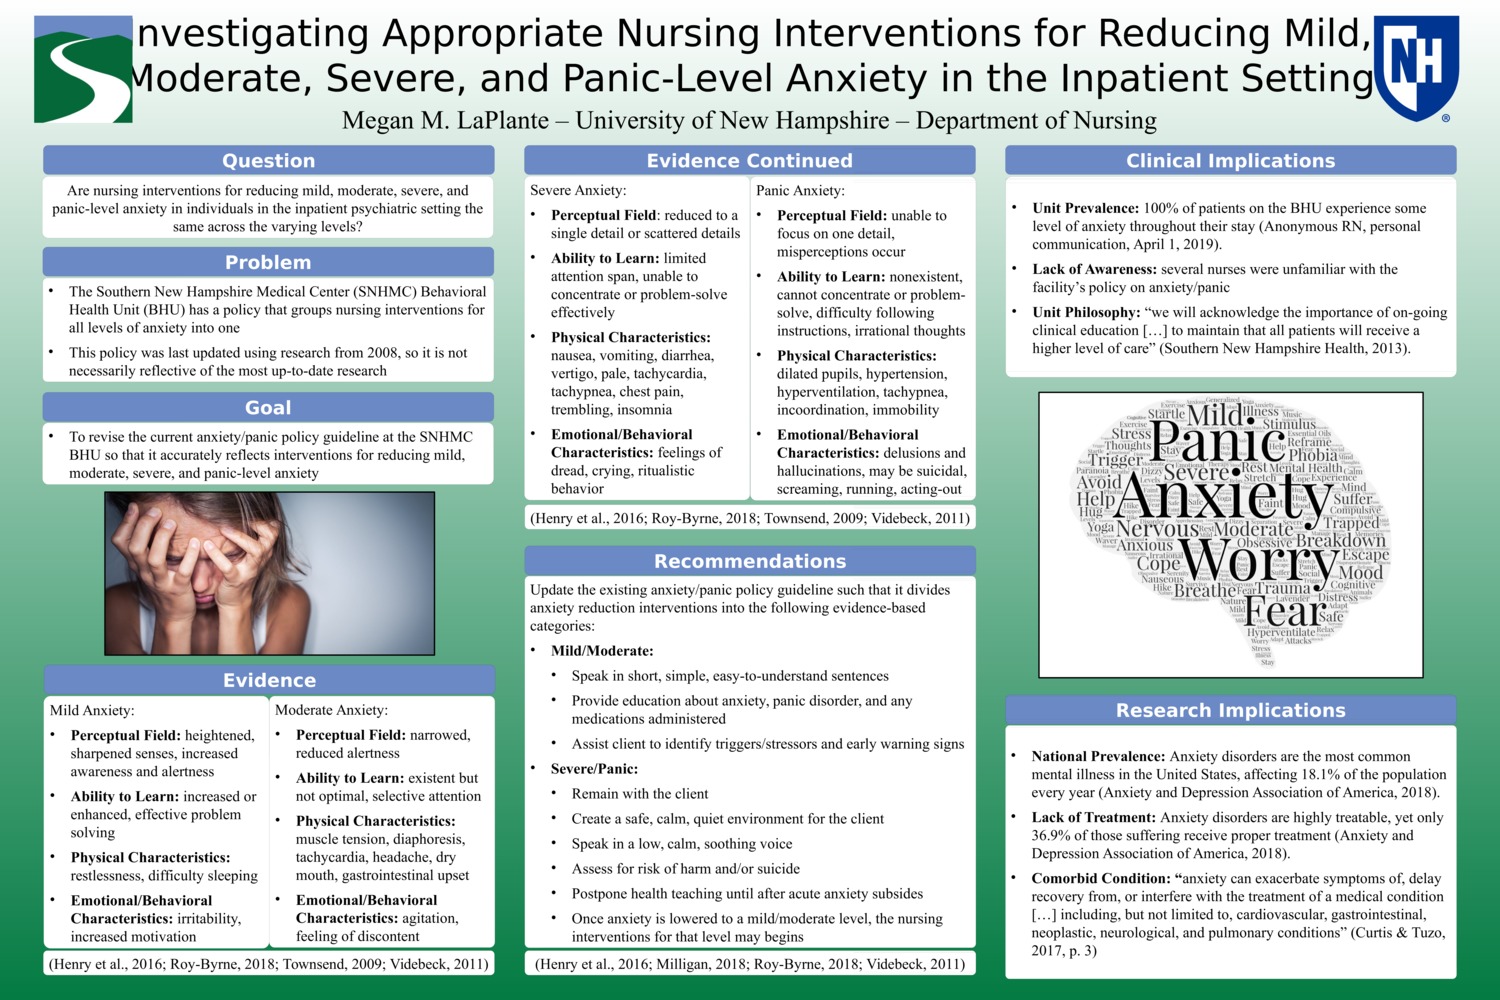 Investigating Appropriate Nursing Interventions For Reducing Mild, Moderate, Severe, And Panic-Level Anxiety In The Inpatient Setting by mml1001